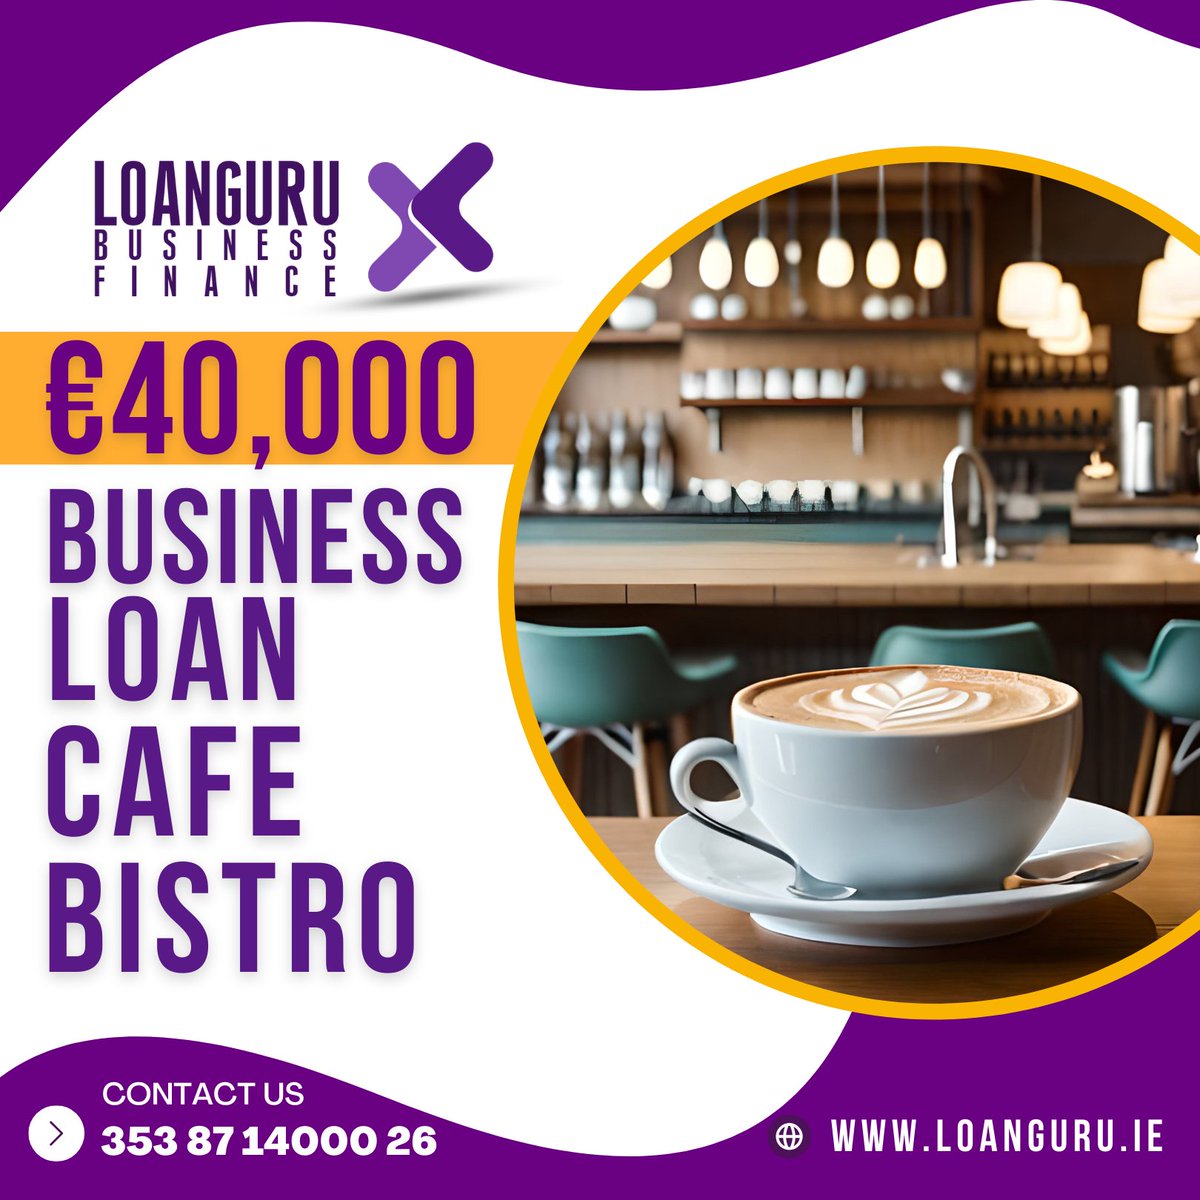 💡Customer Success Story This Week!

A delighted owner of a Cafe Bistro received €40,000 in Business Loan funding to expand their business with an extension.

#irishbusinesses #lending #loangurubusinessfinance
#businessloans #SMEbusinessloans #hospitalityfinance